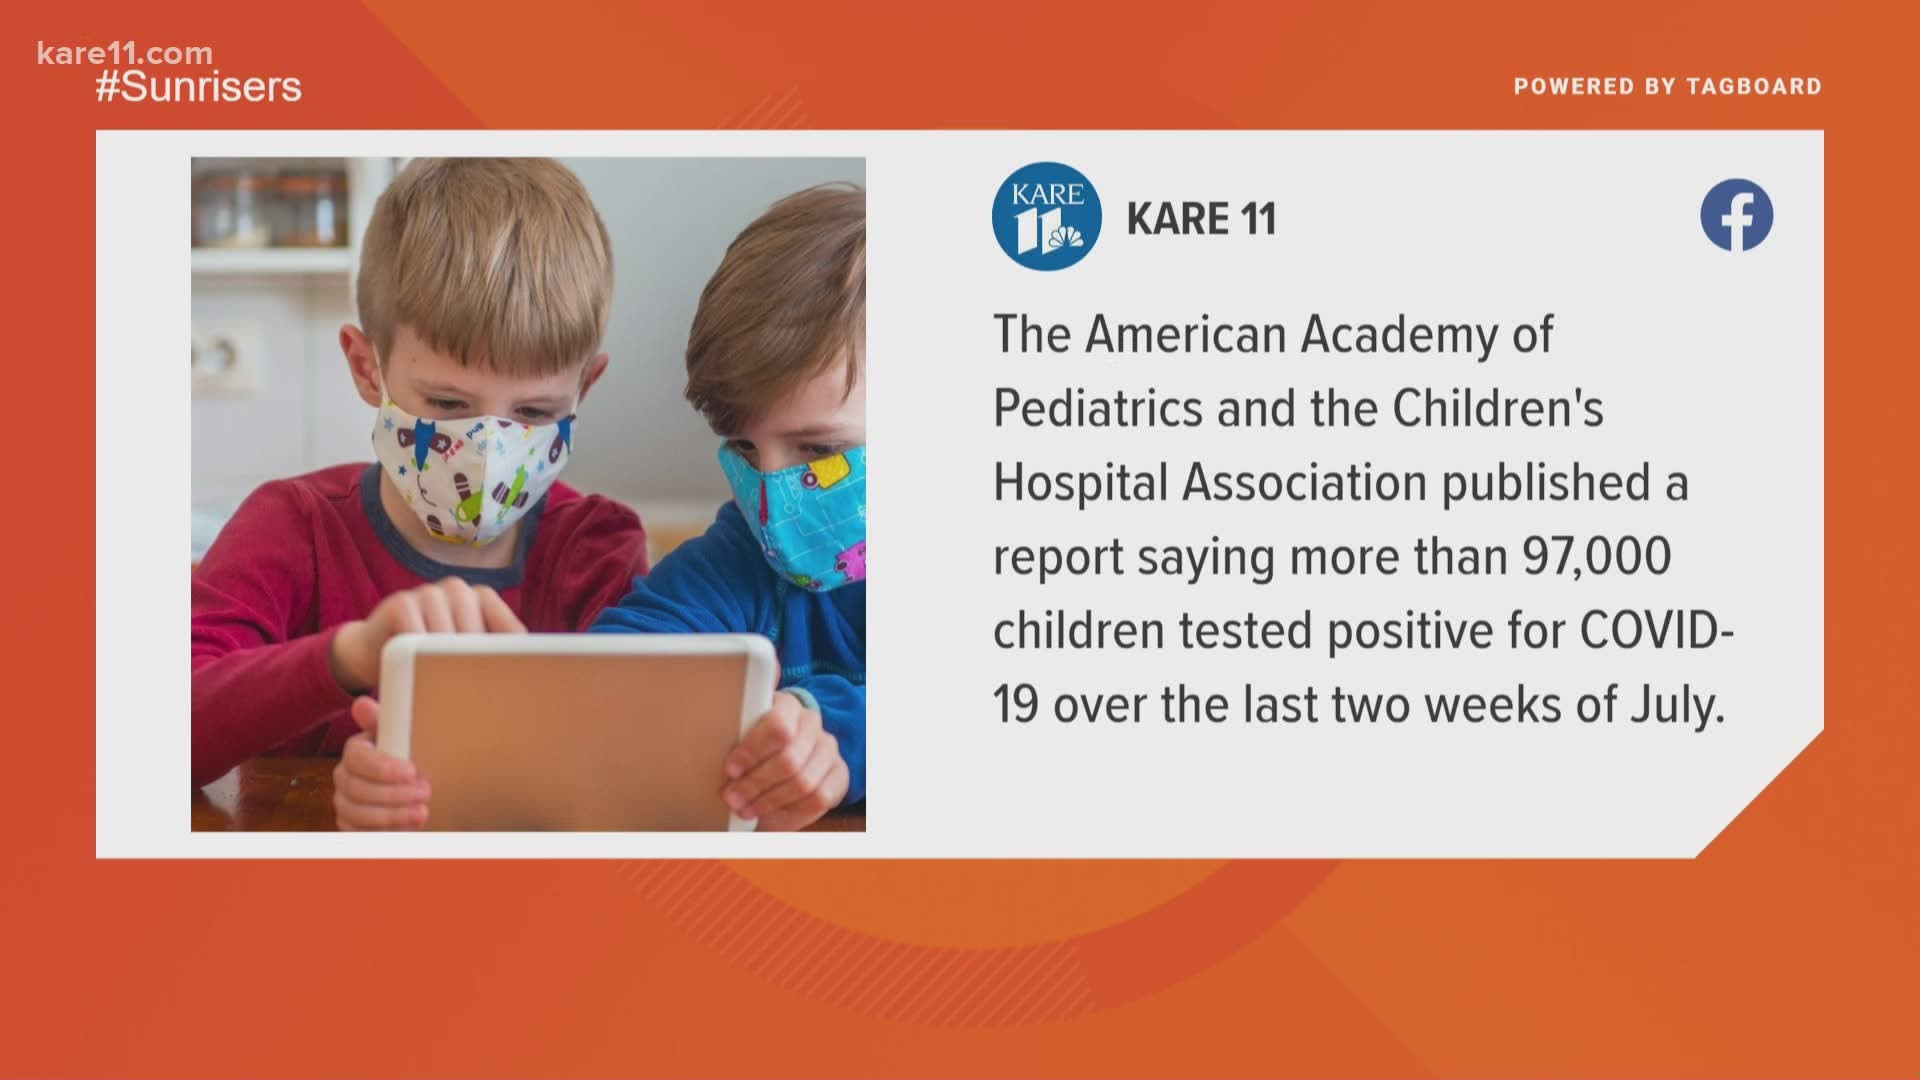 The report from the American Academy of Pediatrics and Children's Hospital released the findings.